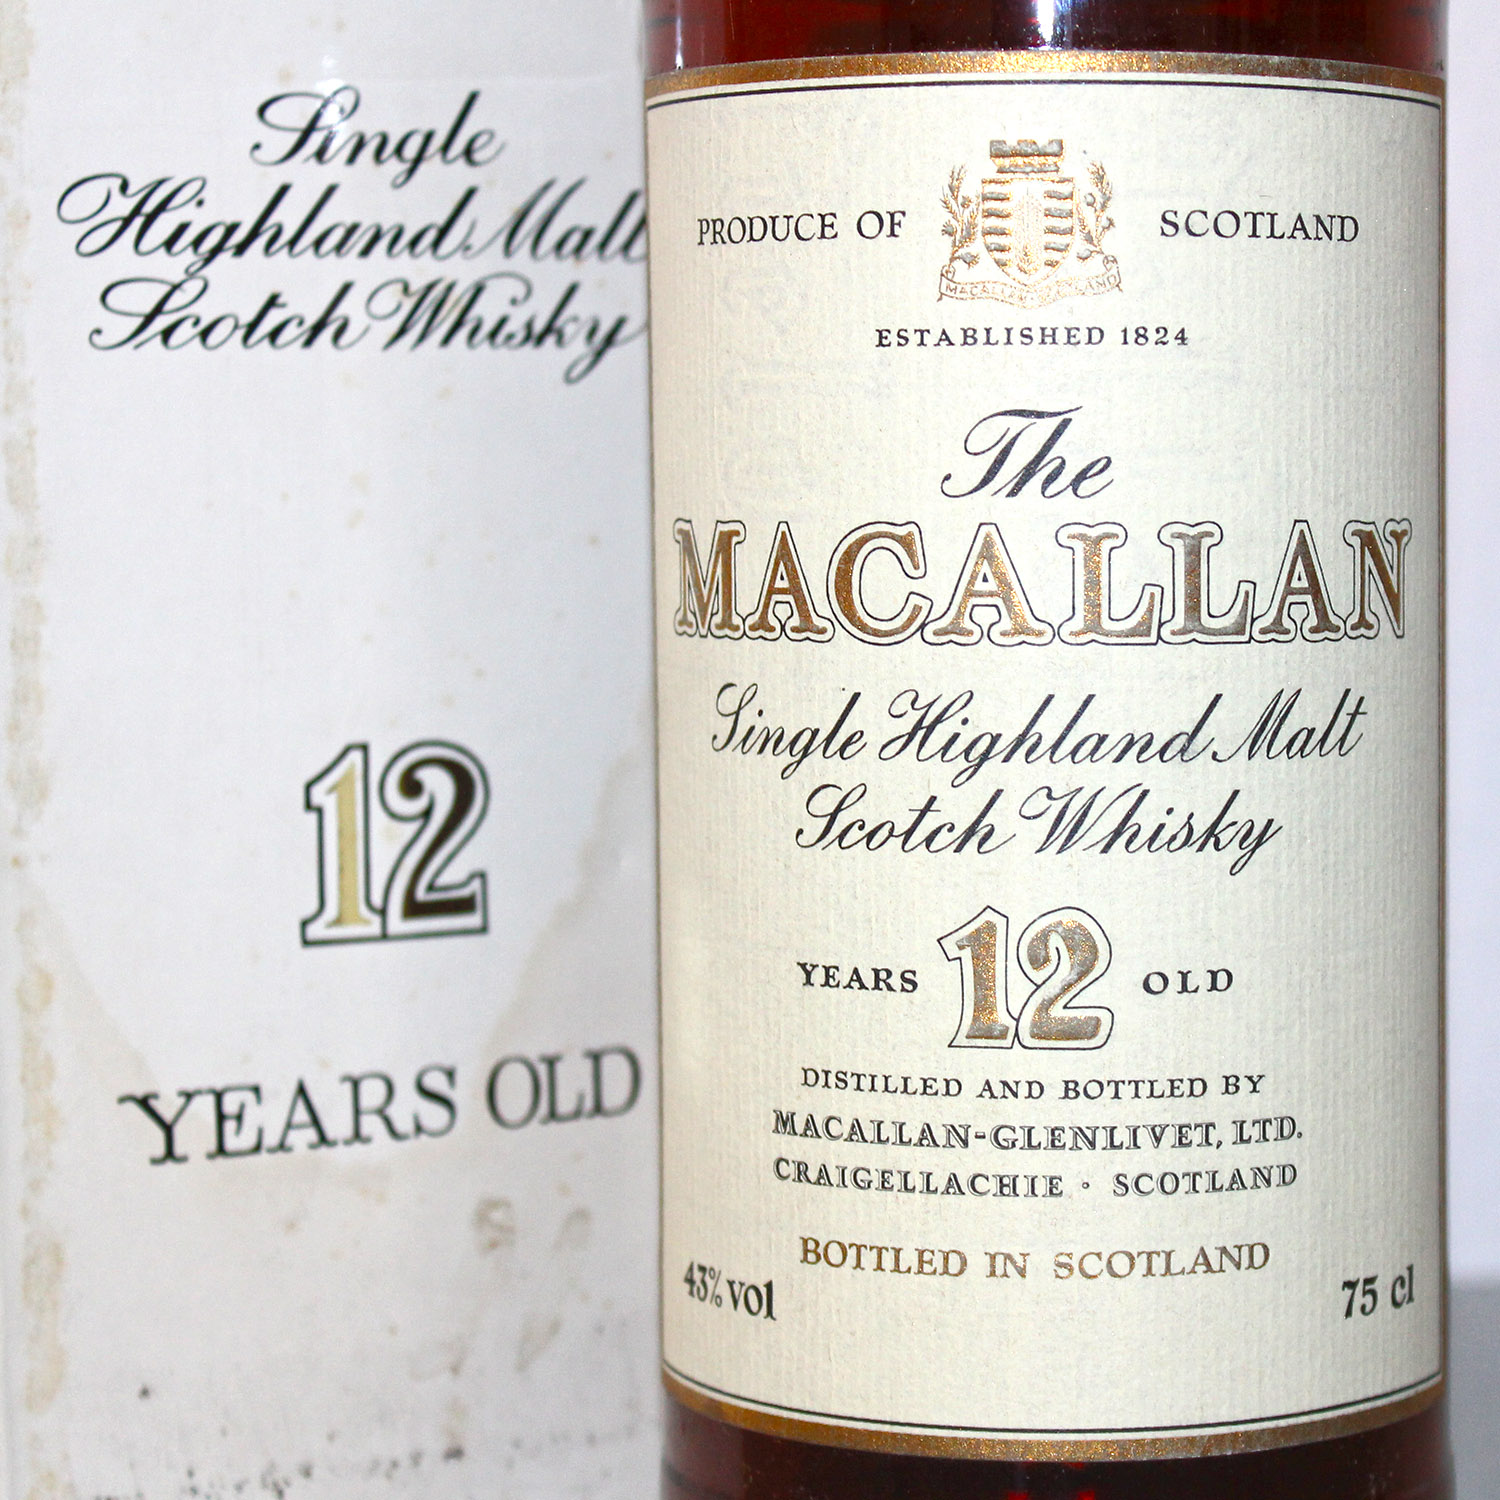 Macallan 12 Years Old Bot 1970s label